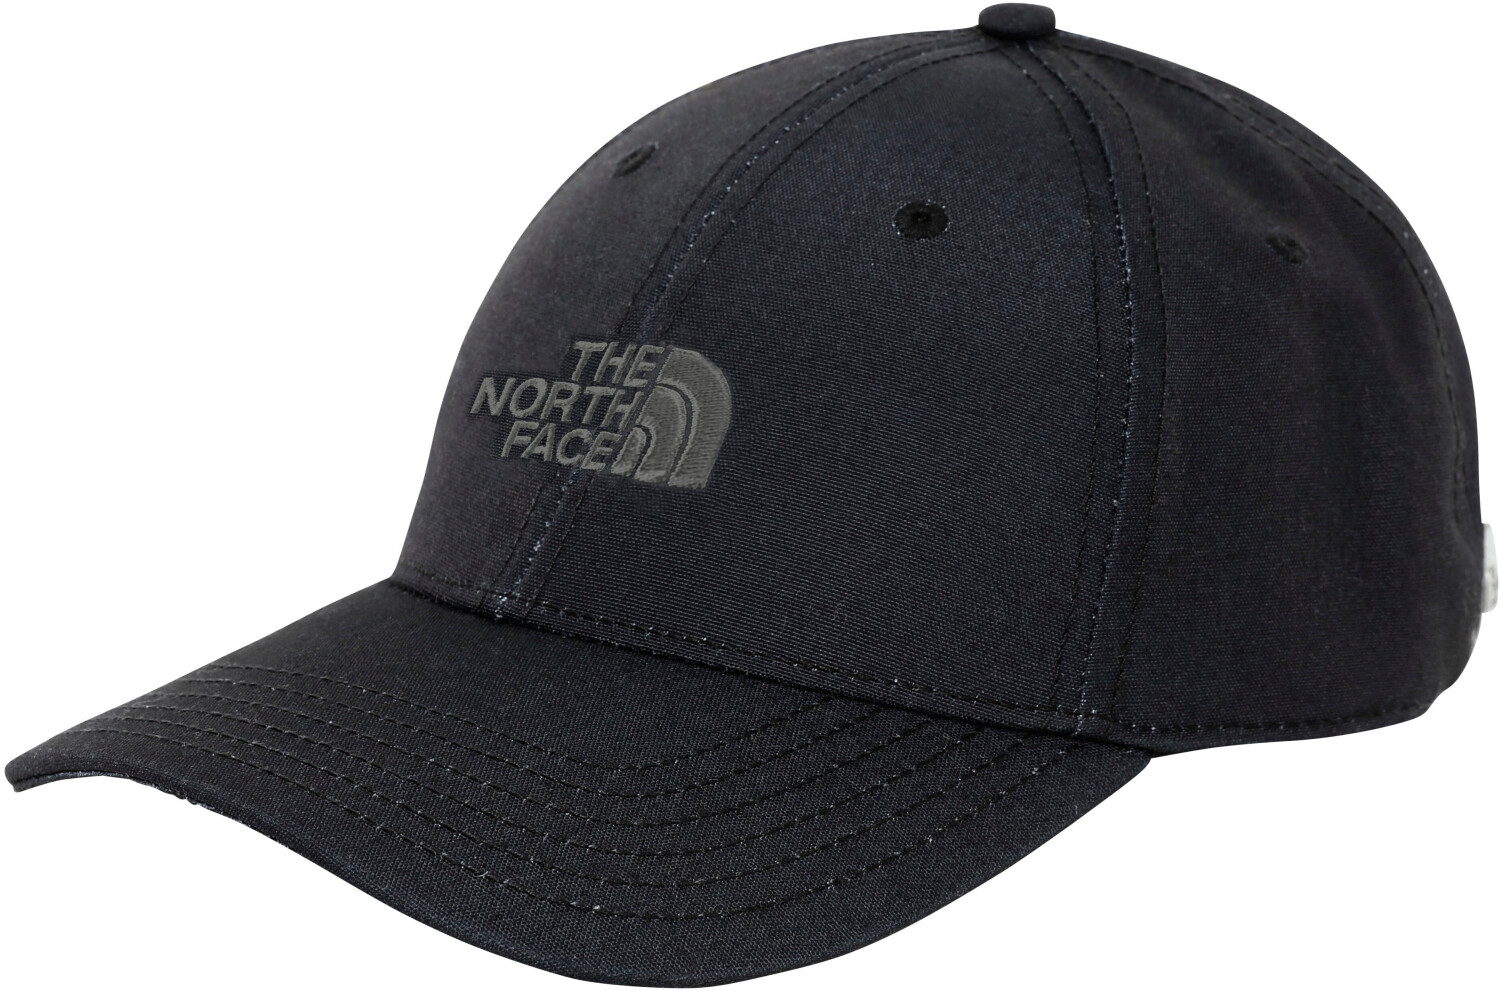 Buy The North Face Unisex '66 Classic Hat tnf black from £24.99 (Today ...